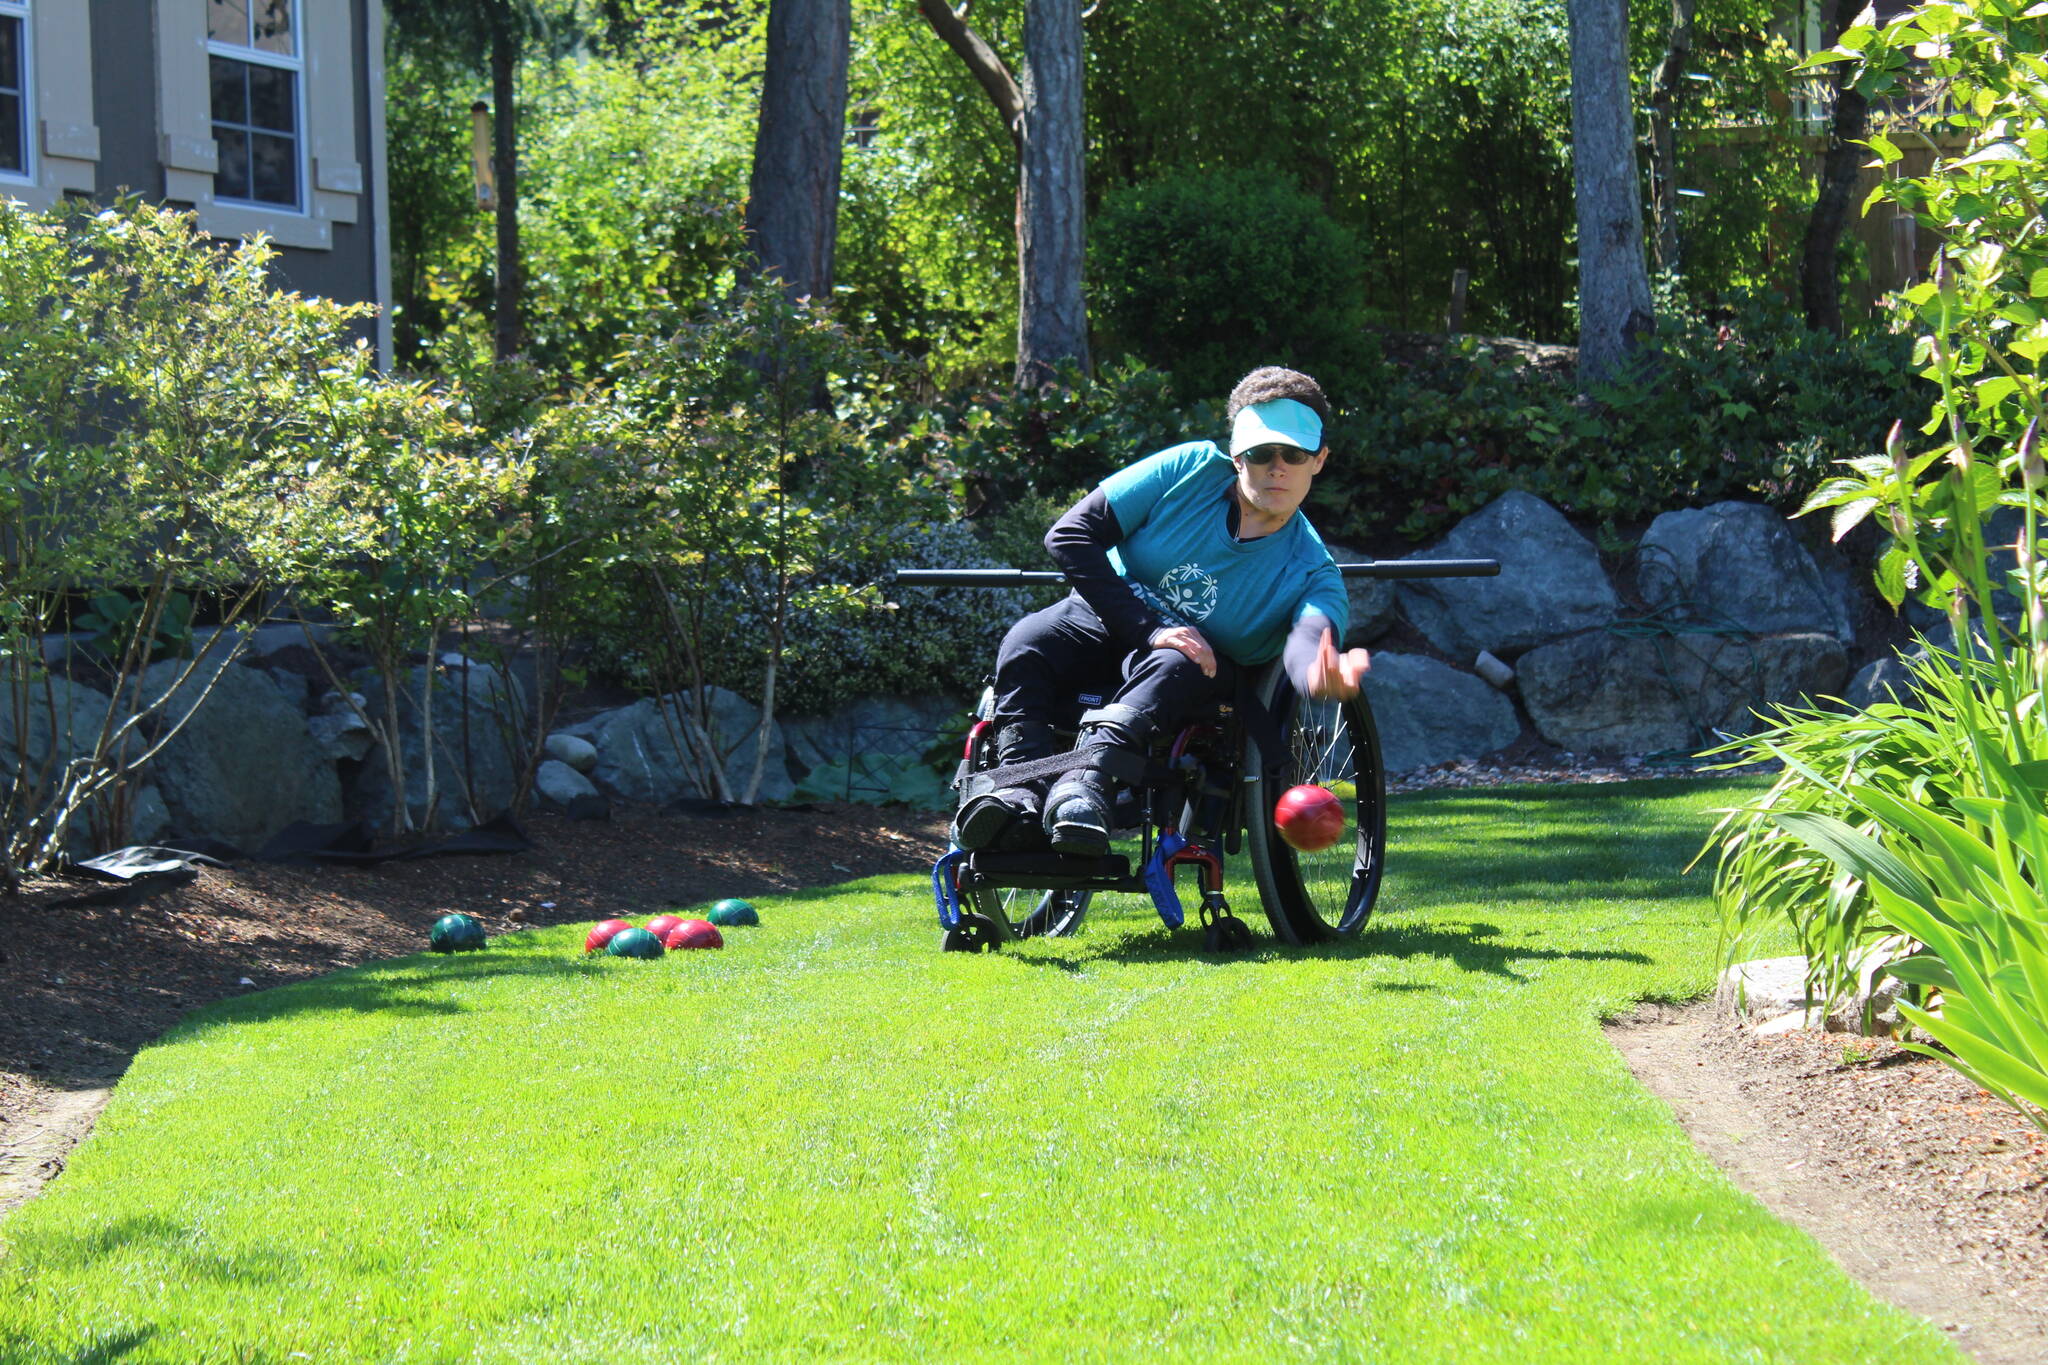 Jacquelyn Diaz has been training regularly for the upcoming Special Olympics. This year, she will be playing singles, doubles and team bocce. (Photo by Karina Andrew/Whidbey News-Times)